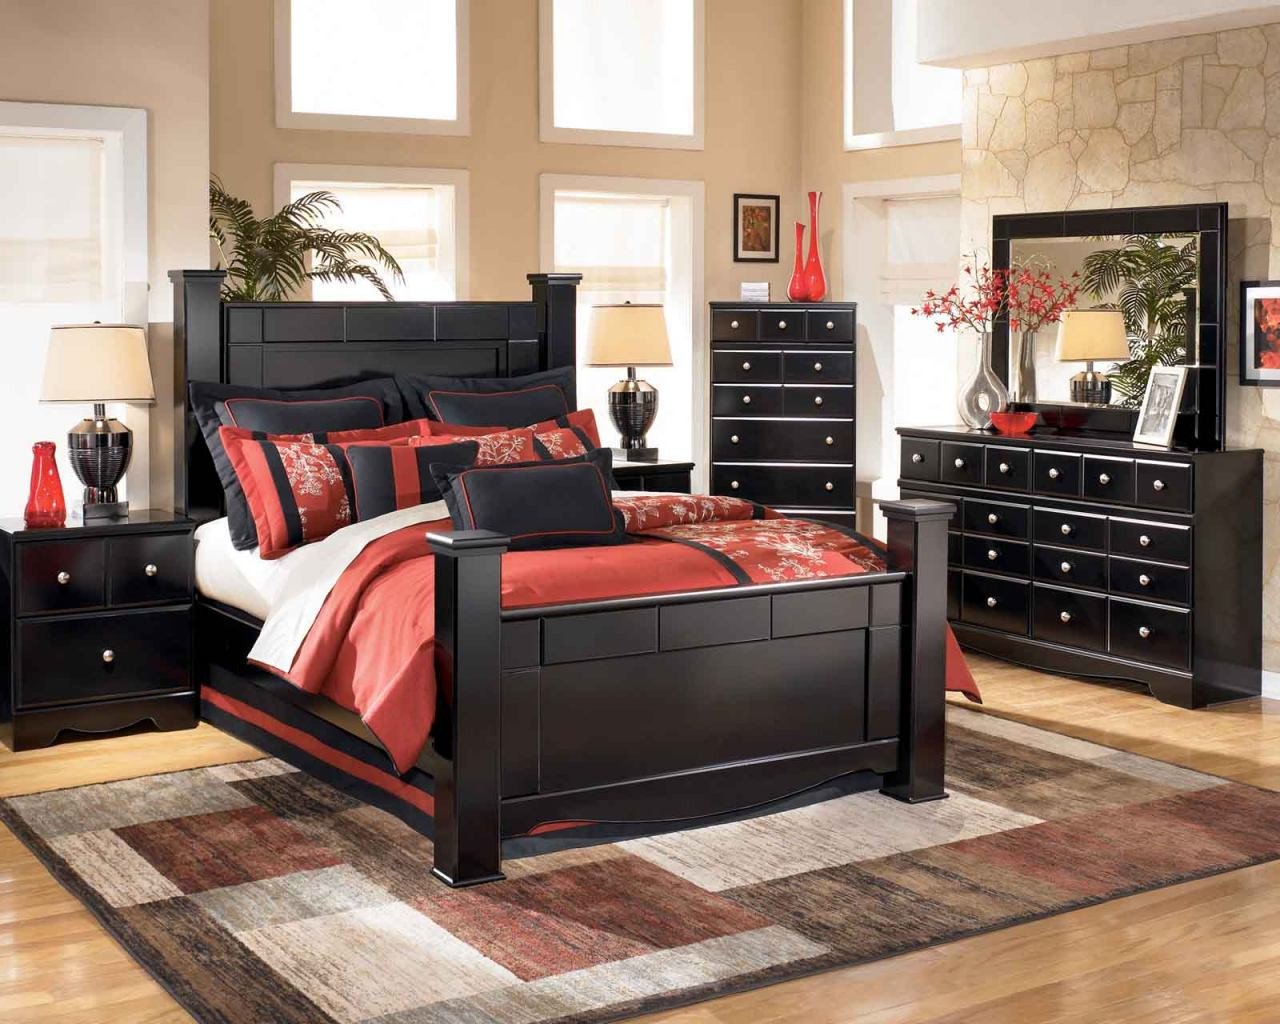 California King Bedroom Set Clearance Awesome Shay Poster Bedroom Set In Black